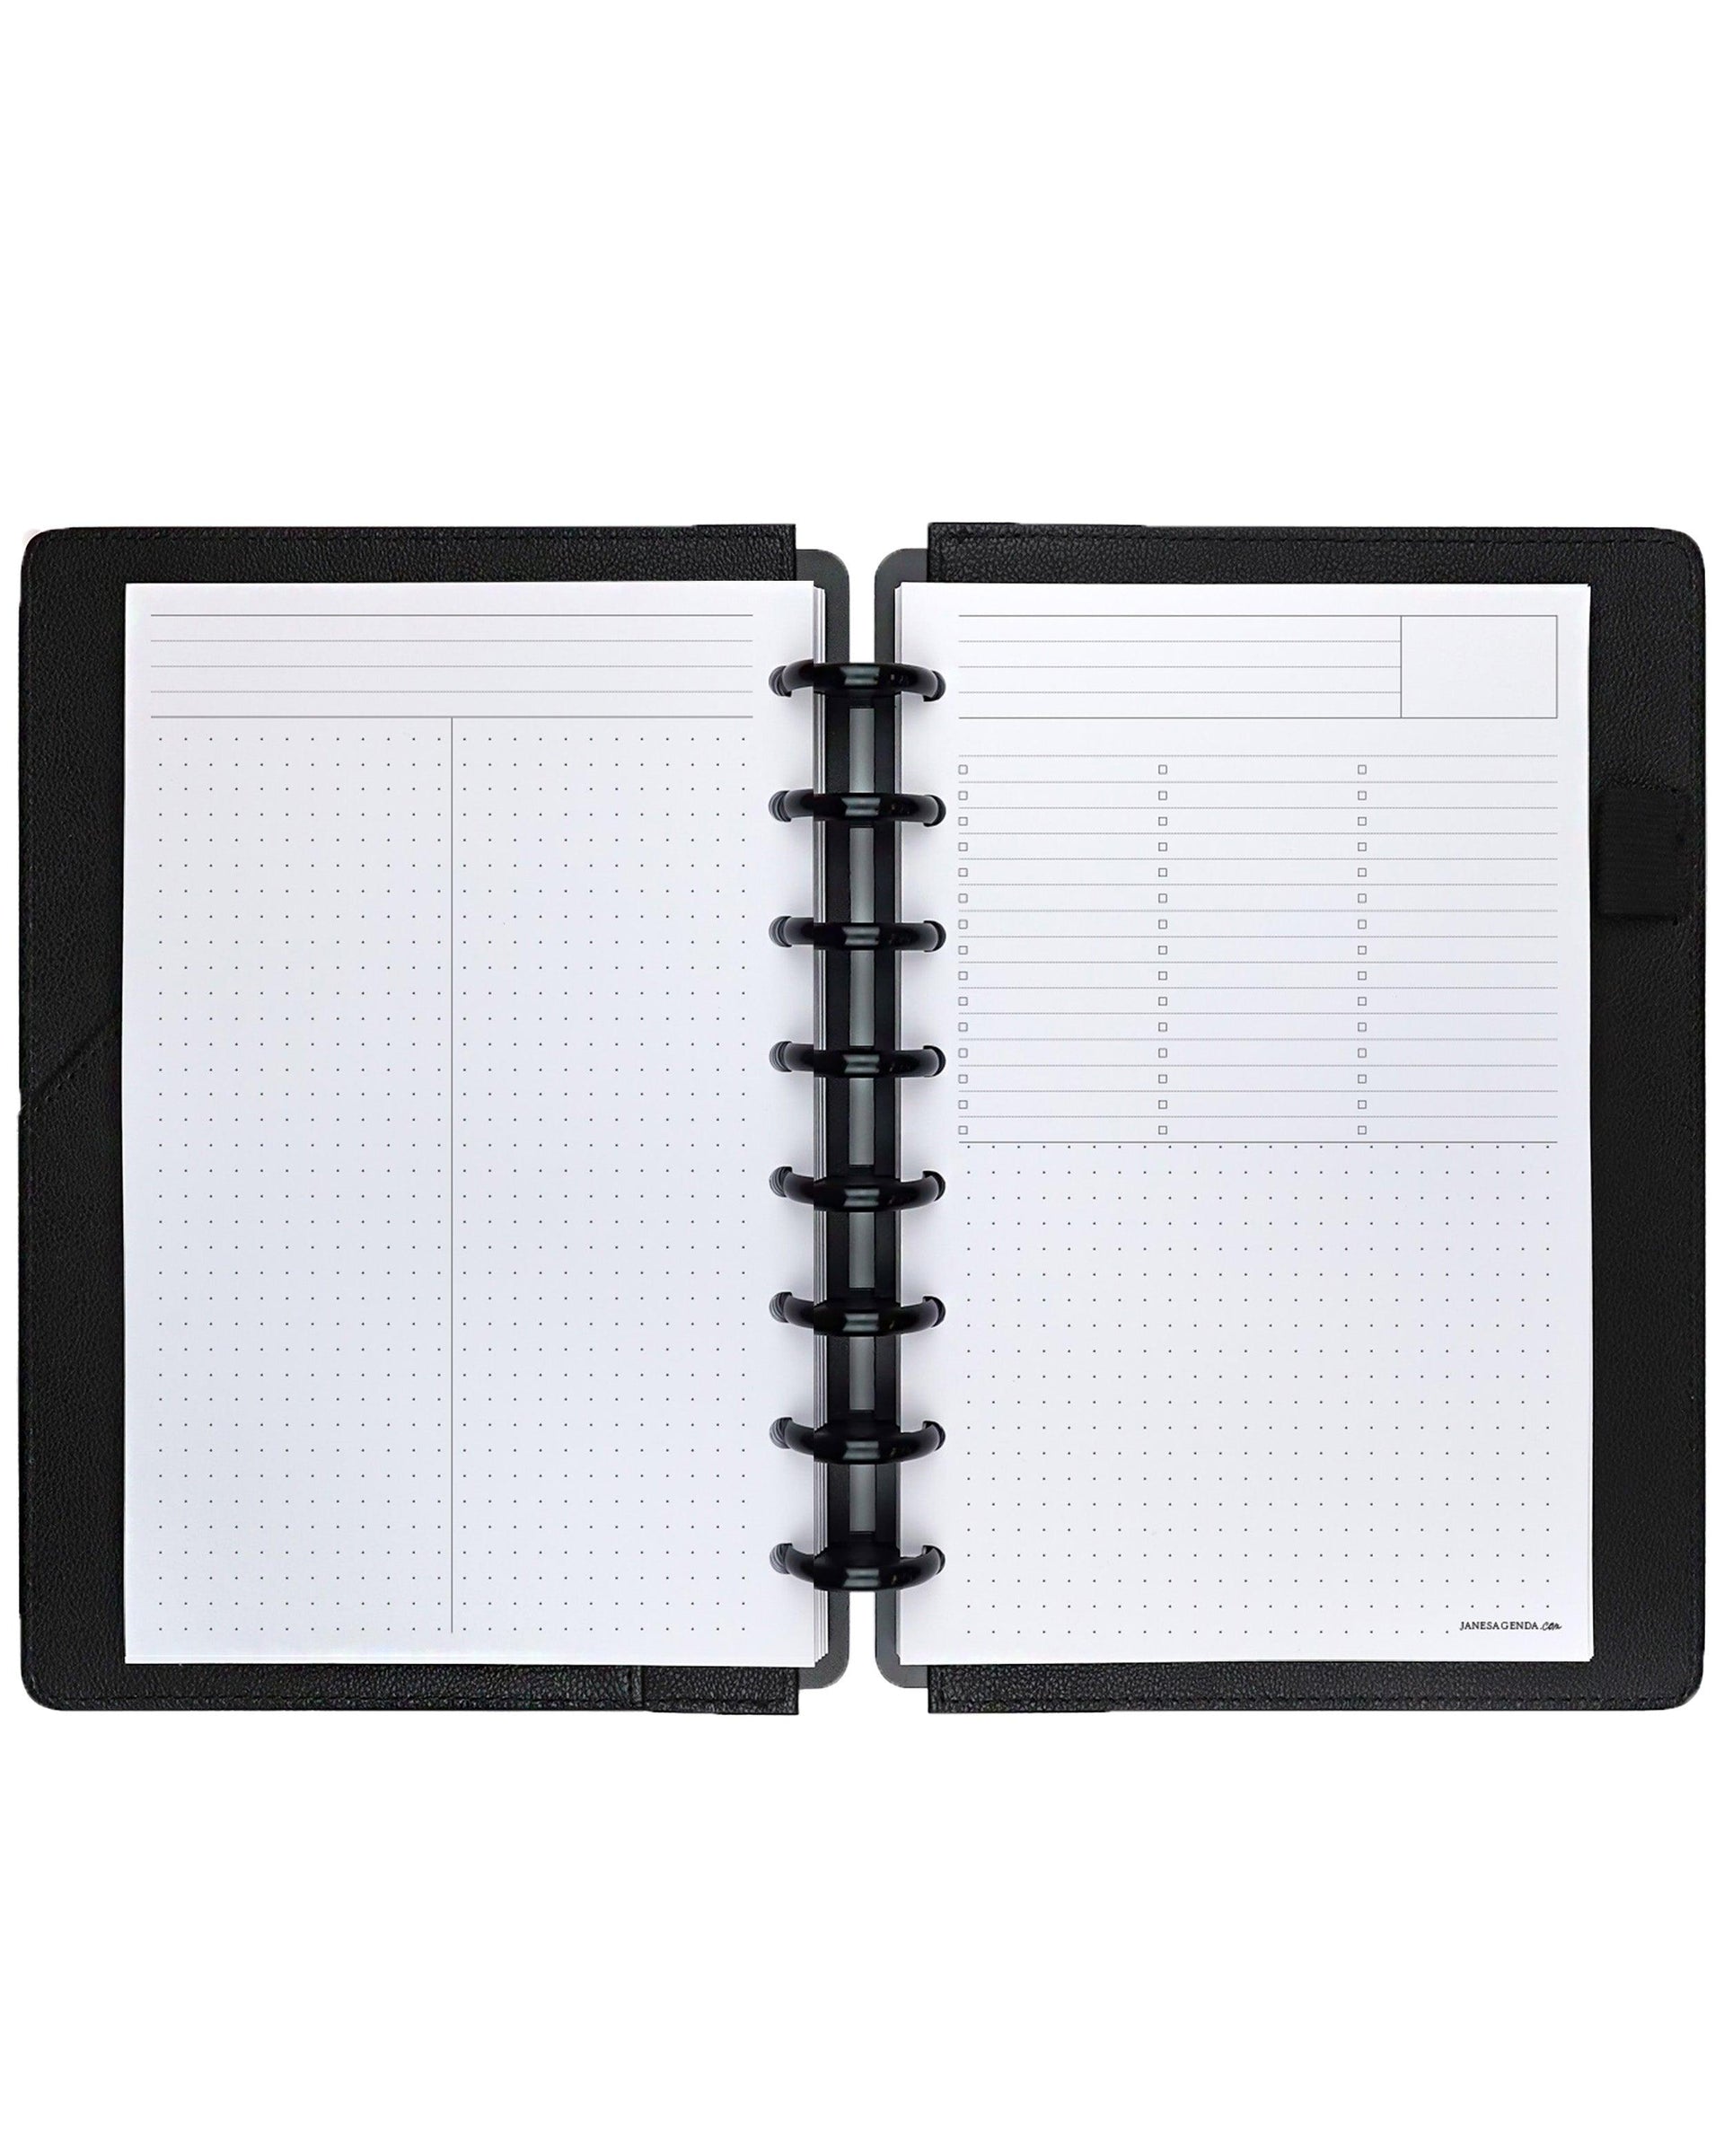 Notes planner refill pages for discbound and six ring planner by Janes agenda®.